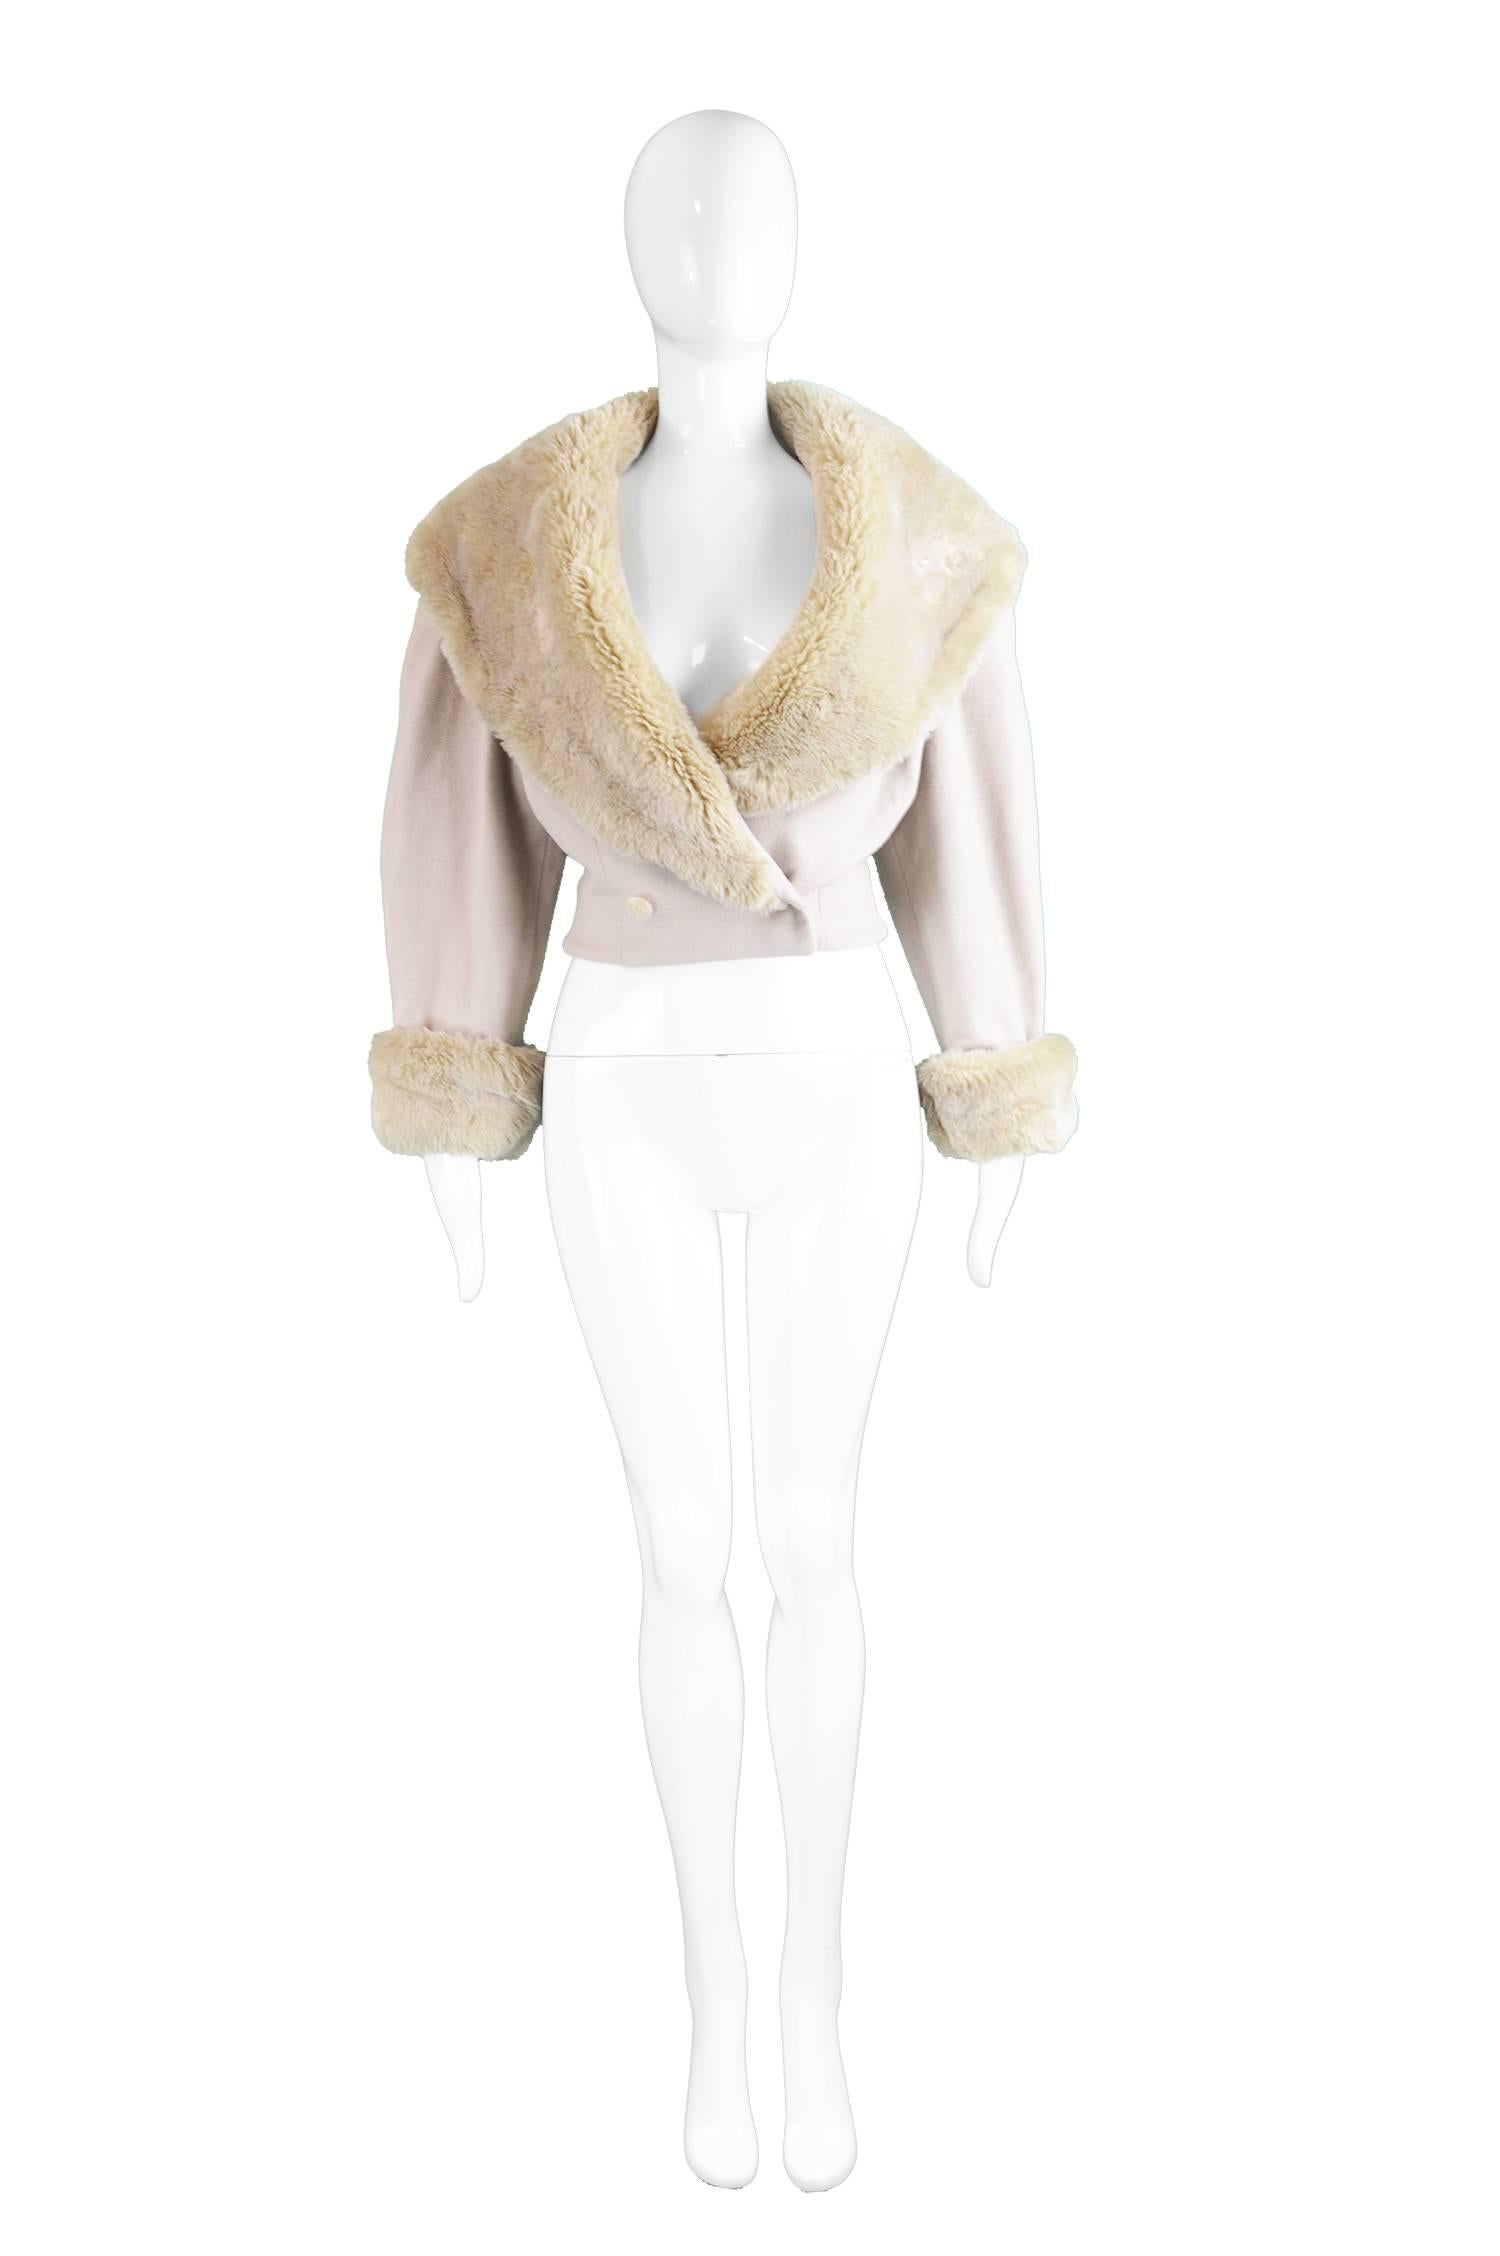 Byblos Crop Nude Wool Jacket with Dramatic Faux Fur Collar, 1980s

Estimated Size: UK 10 / US 6/ EU 38. Please check measurements.  
Bust - 38” / 96cm (has a loose fit on the bust)
Waist - 28” / 71cm
Length (Shoulder to Hem) - 17” / 43cm
Sleeve Pit